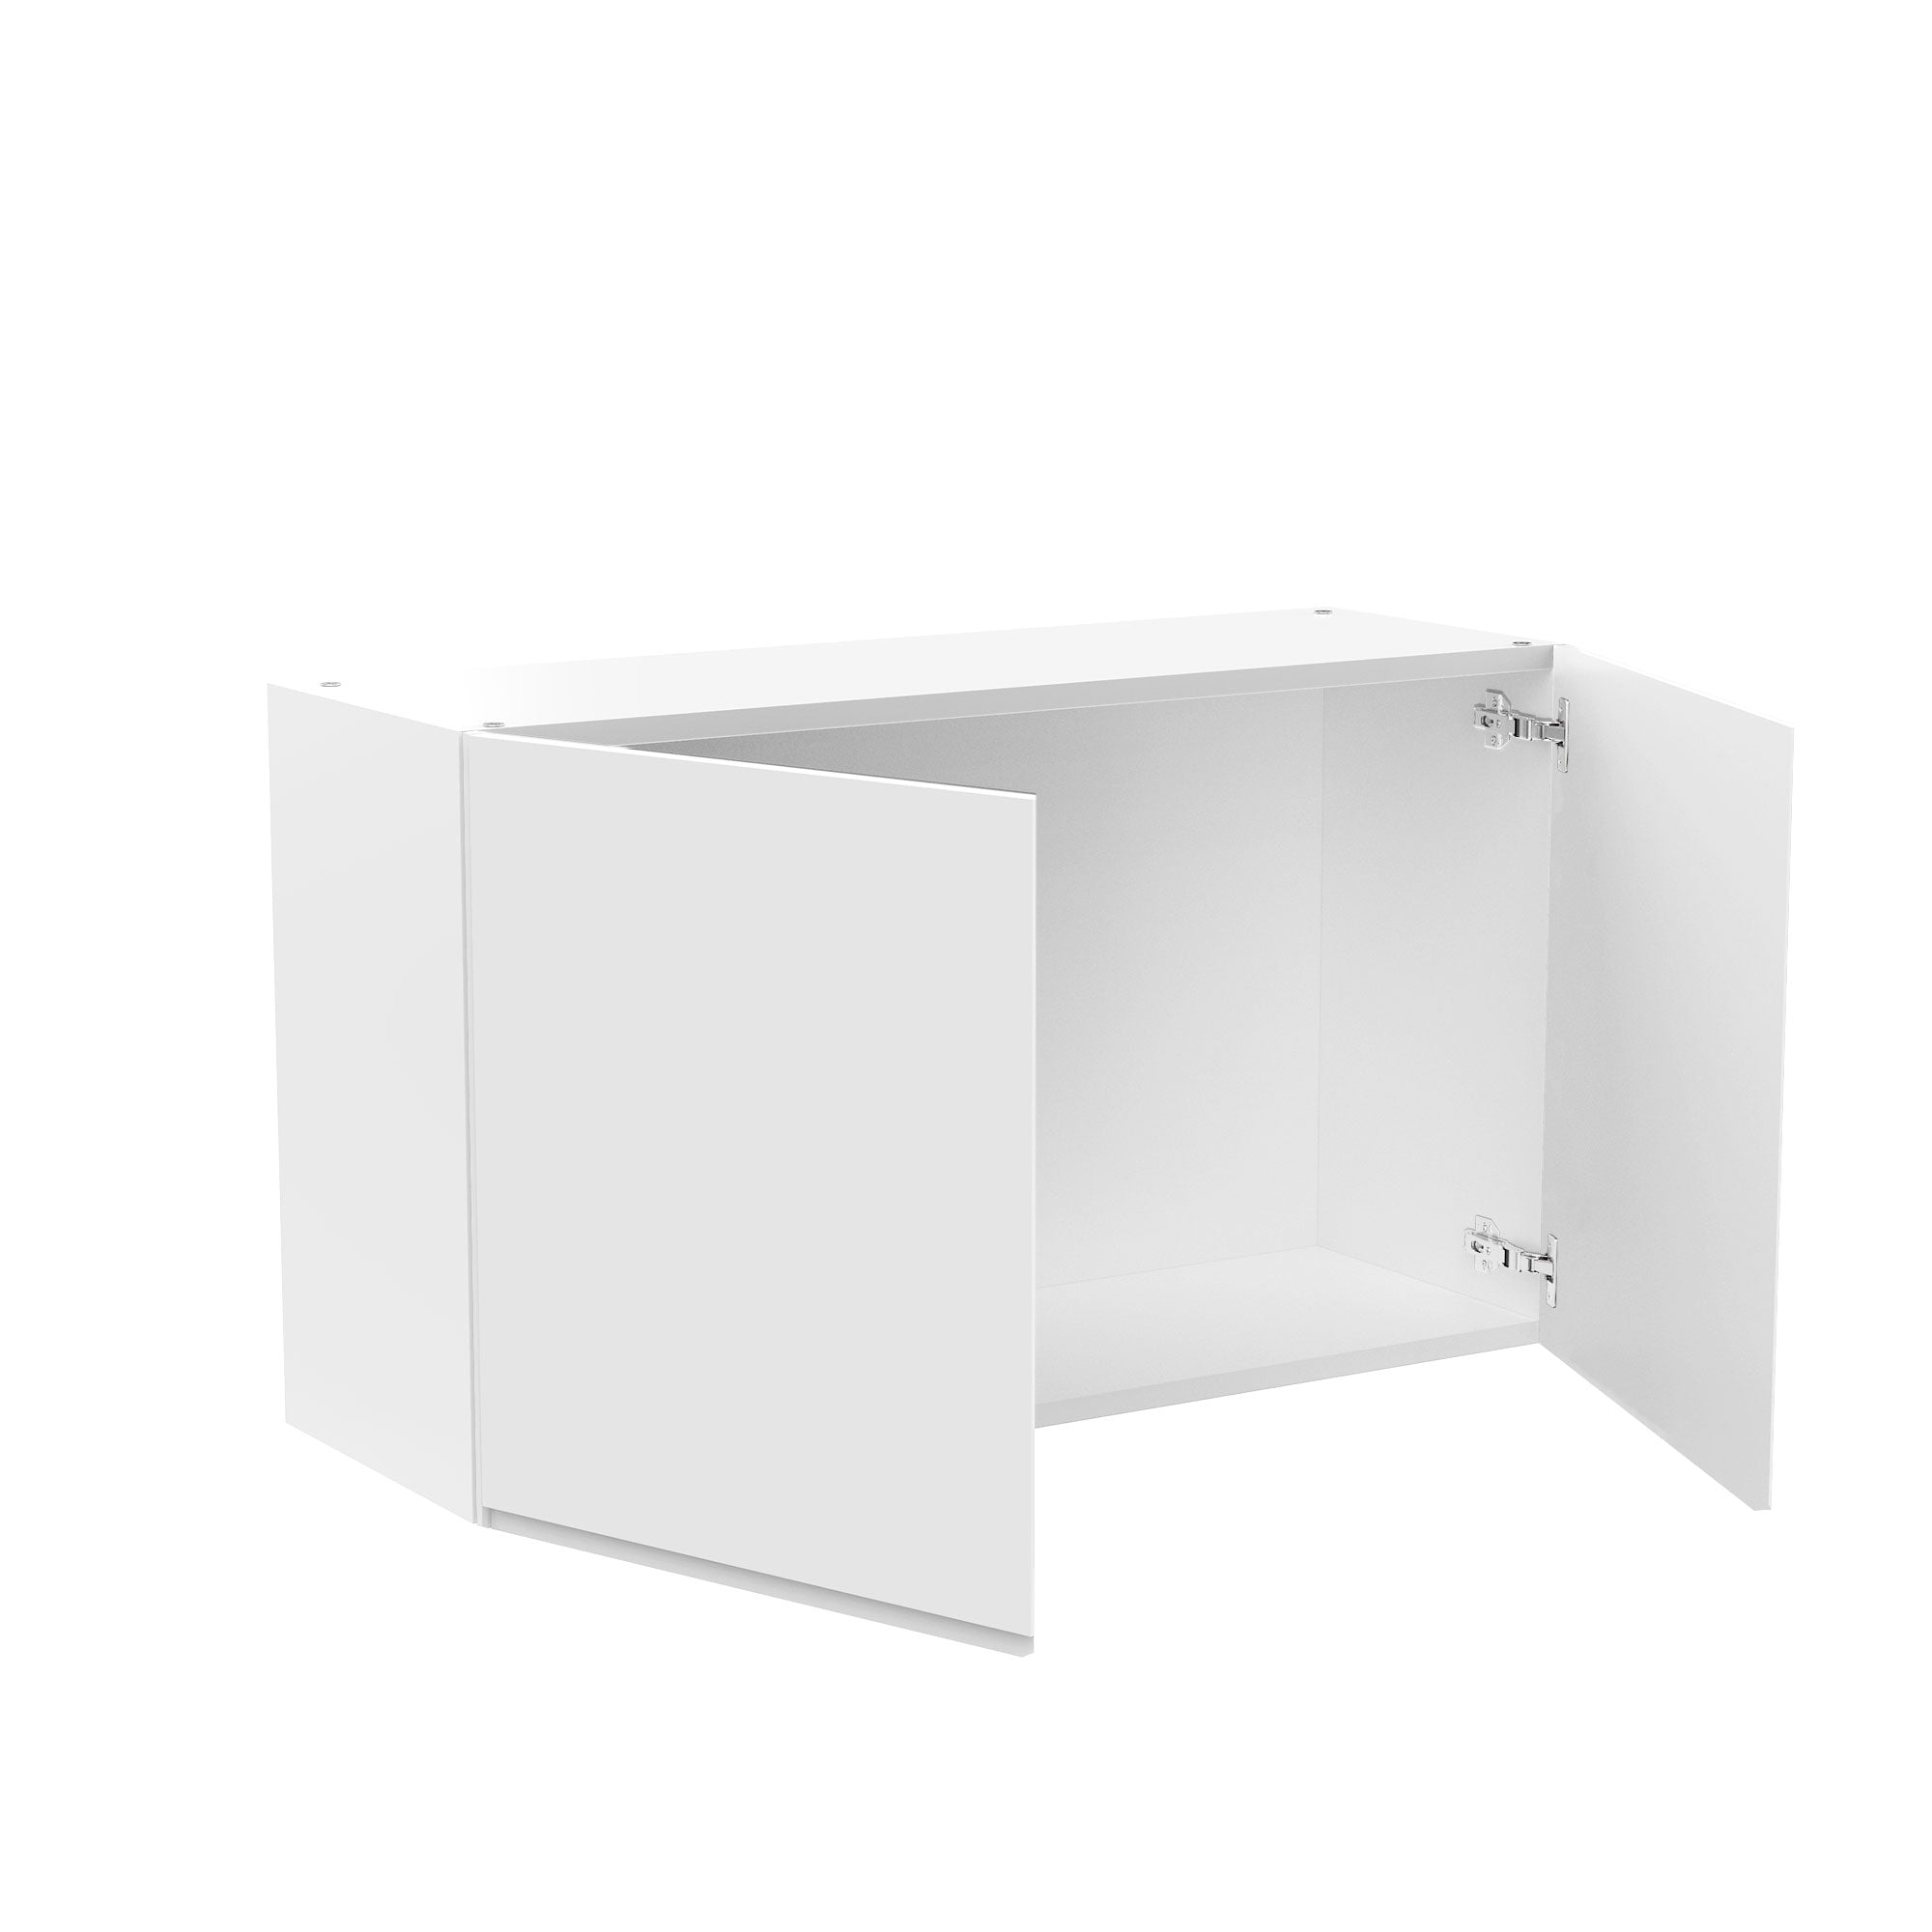 Kitchen Wall Cabinet - RTA - Lacquer white - 2 Door Wall Cabinet | 33"W x 21"H x 12"D